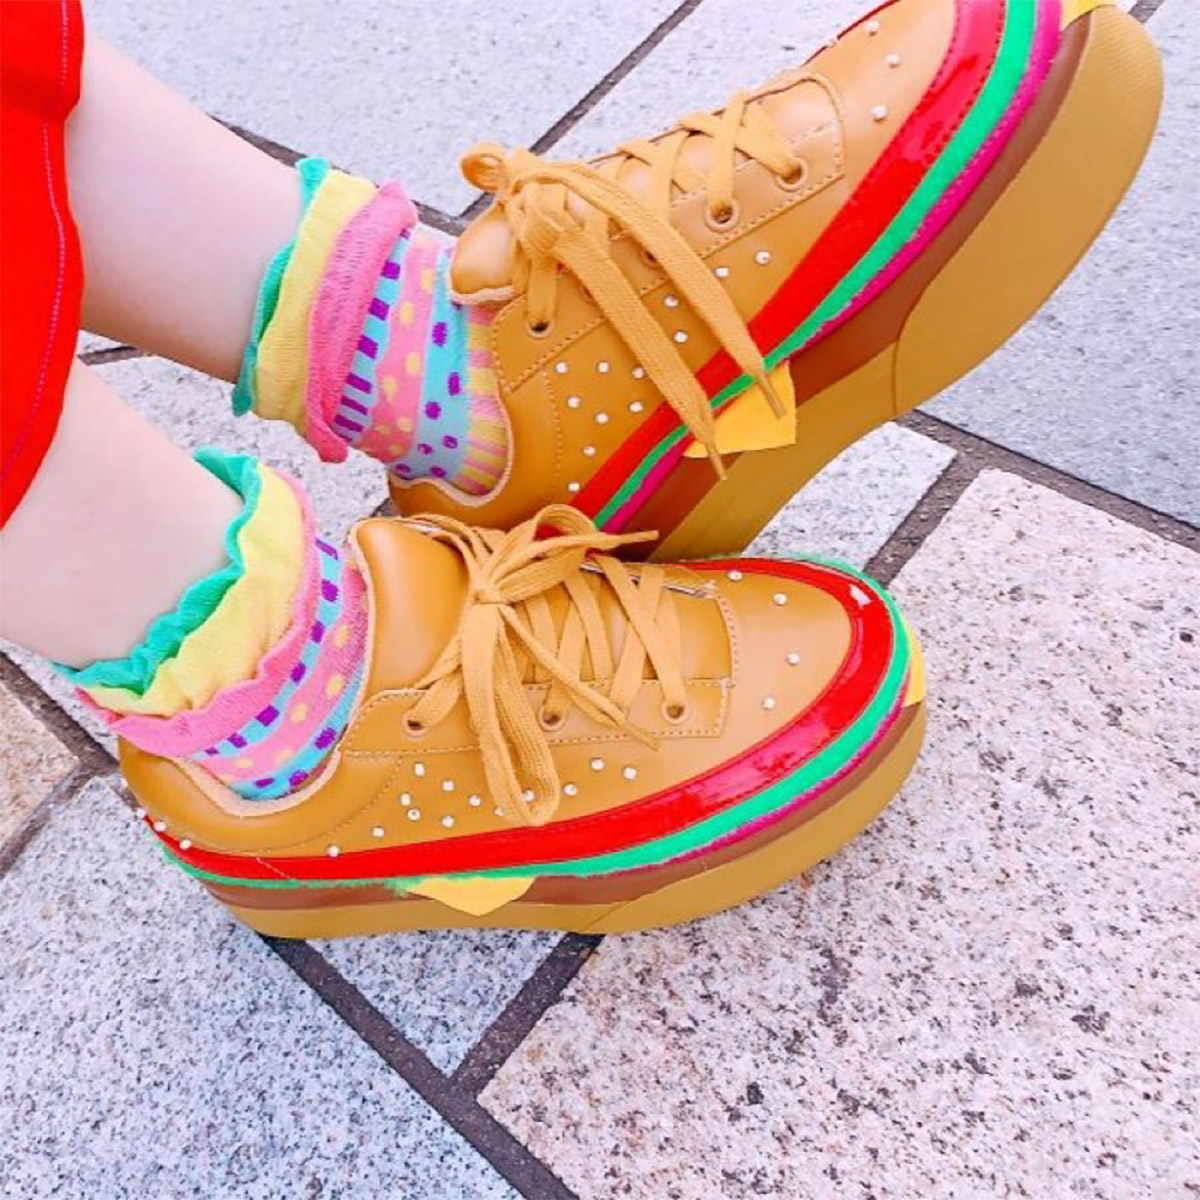 Cheeseburger Shoes - EXTRA CHEESE PLZ BURGER SNEAKERS